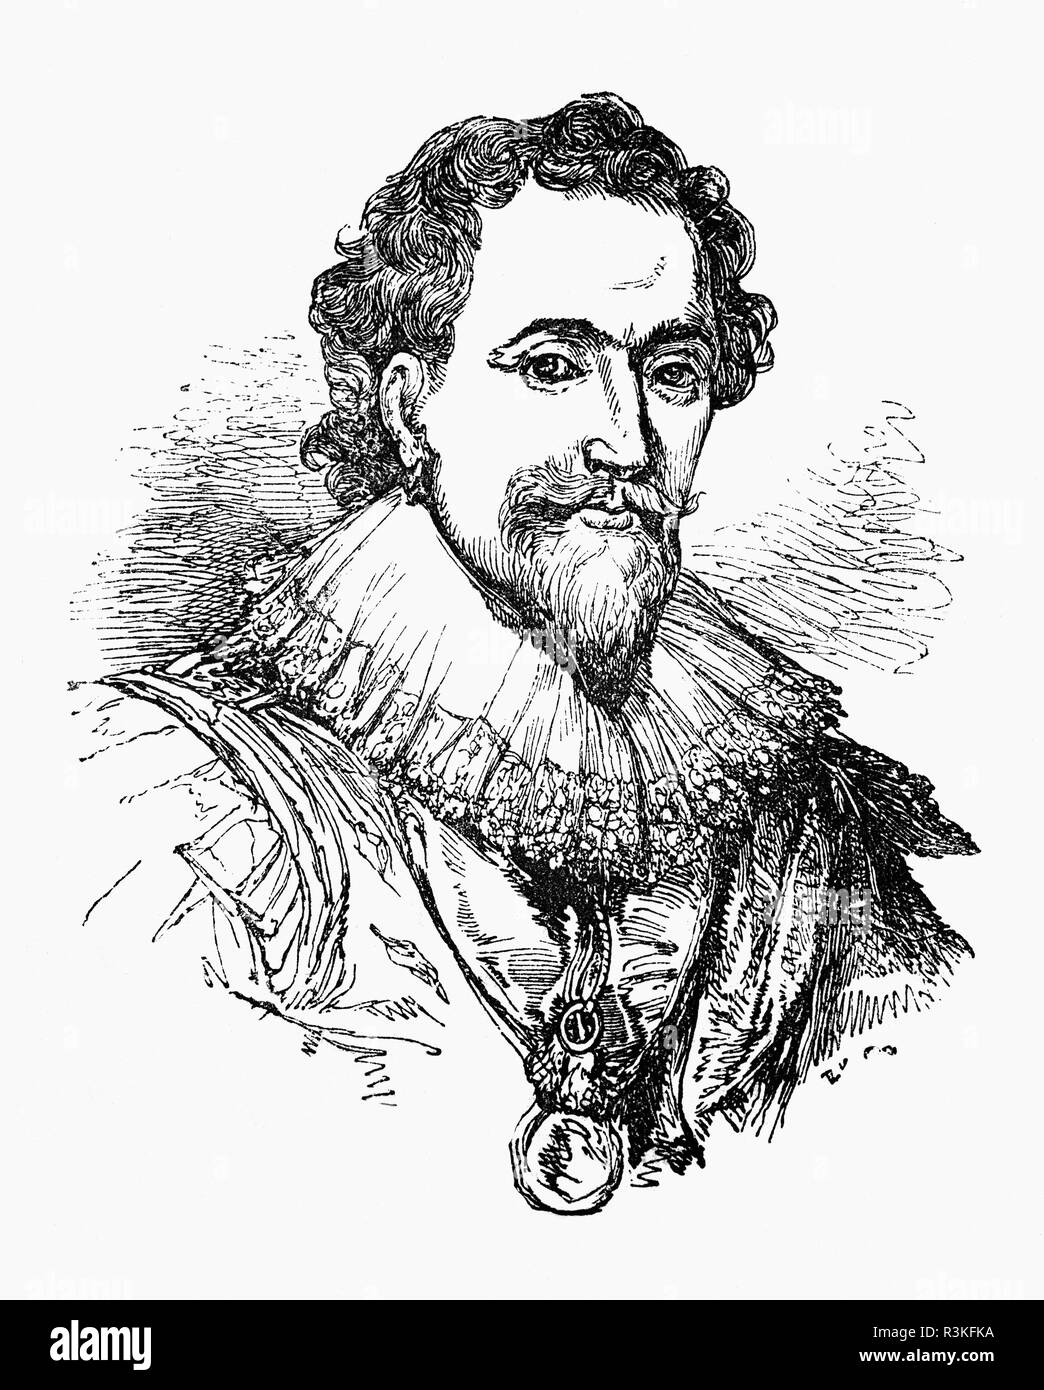 William Herbert, 3rd Earl of Pembroke (1580-1630) was an English nobleman, politician, and courtier. He was Chancellor of the University of Oxford and founded Pembroke College, Oxford with King James I. He served as Lord Chamberlain from 1615 to 1625. In 1623, the First Folio of William Shakespeare's plays was dedicated to him, together with his brother, Philip Herbert, 1st Earl of Montgomery.  Herbert was keenly interested in the colonization of the Americas. He was Lord Steward from 1626 to 1630. Stock Photo